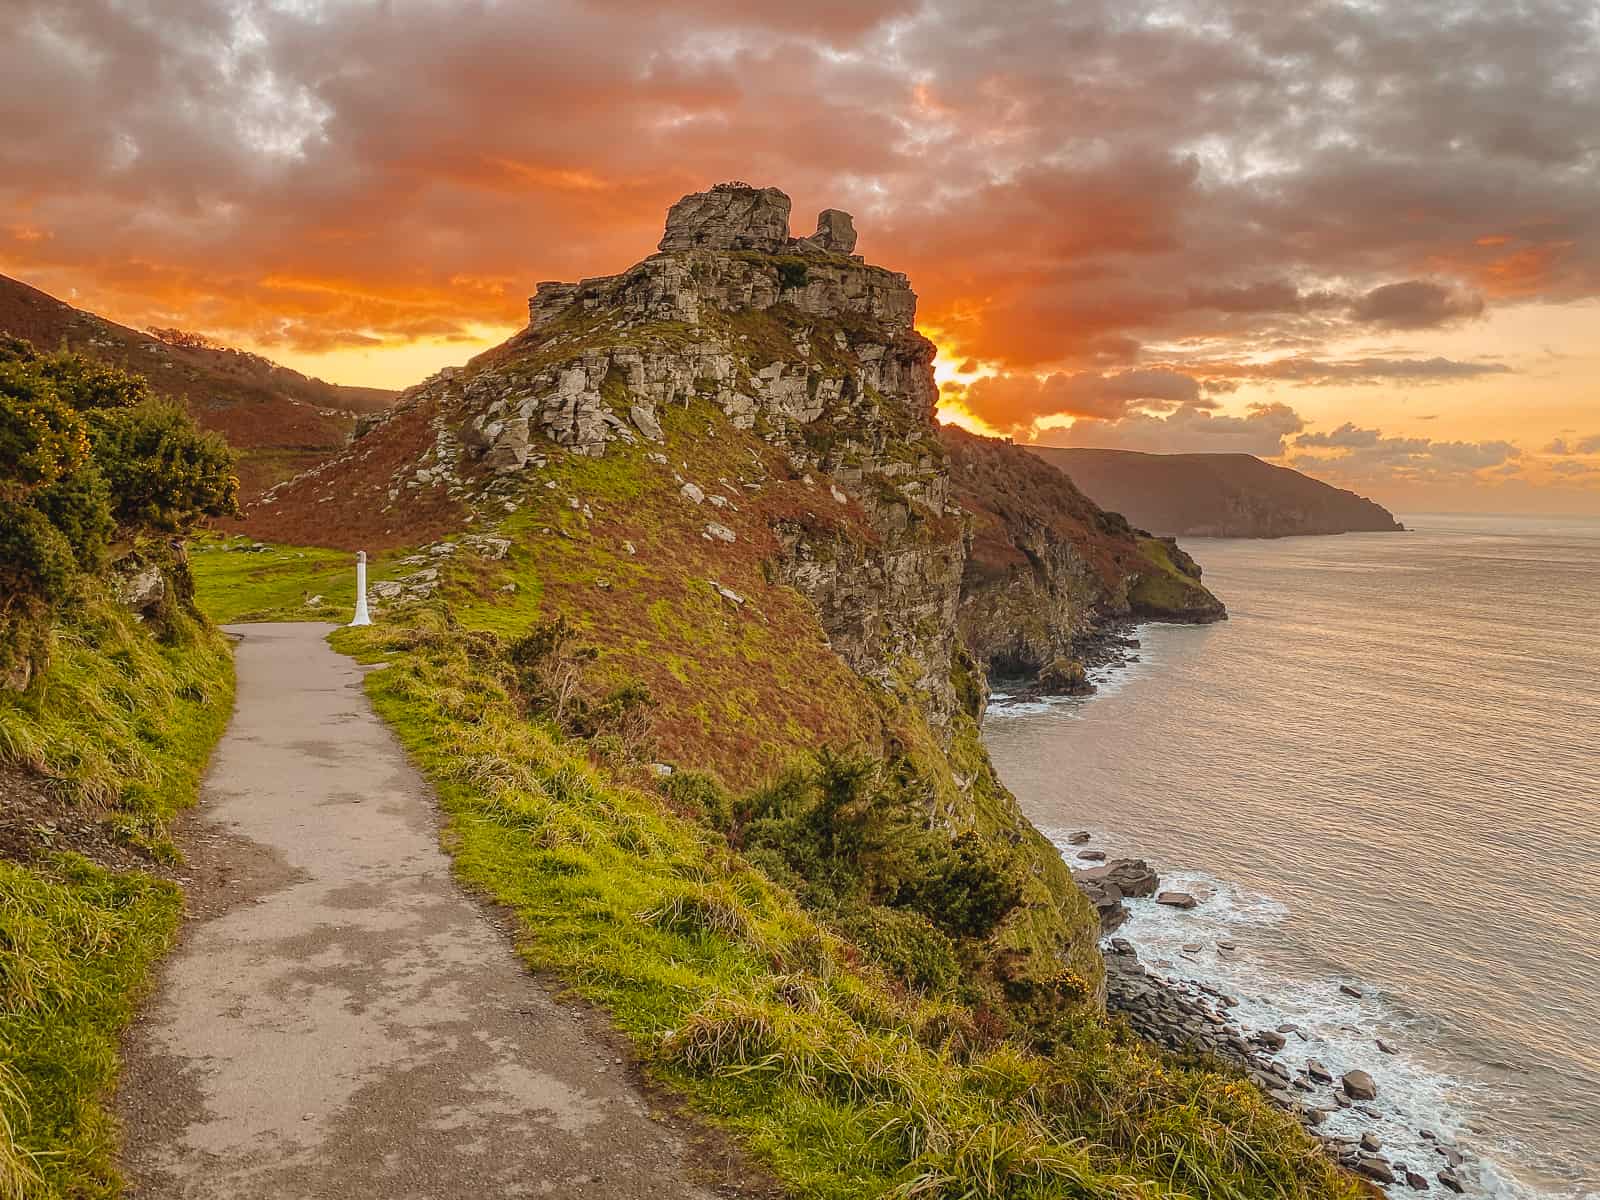 How to Visit Valley of the Rocks Exmoor